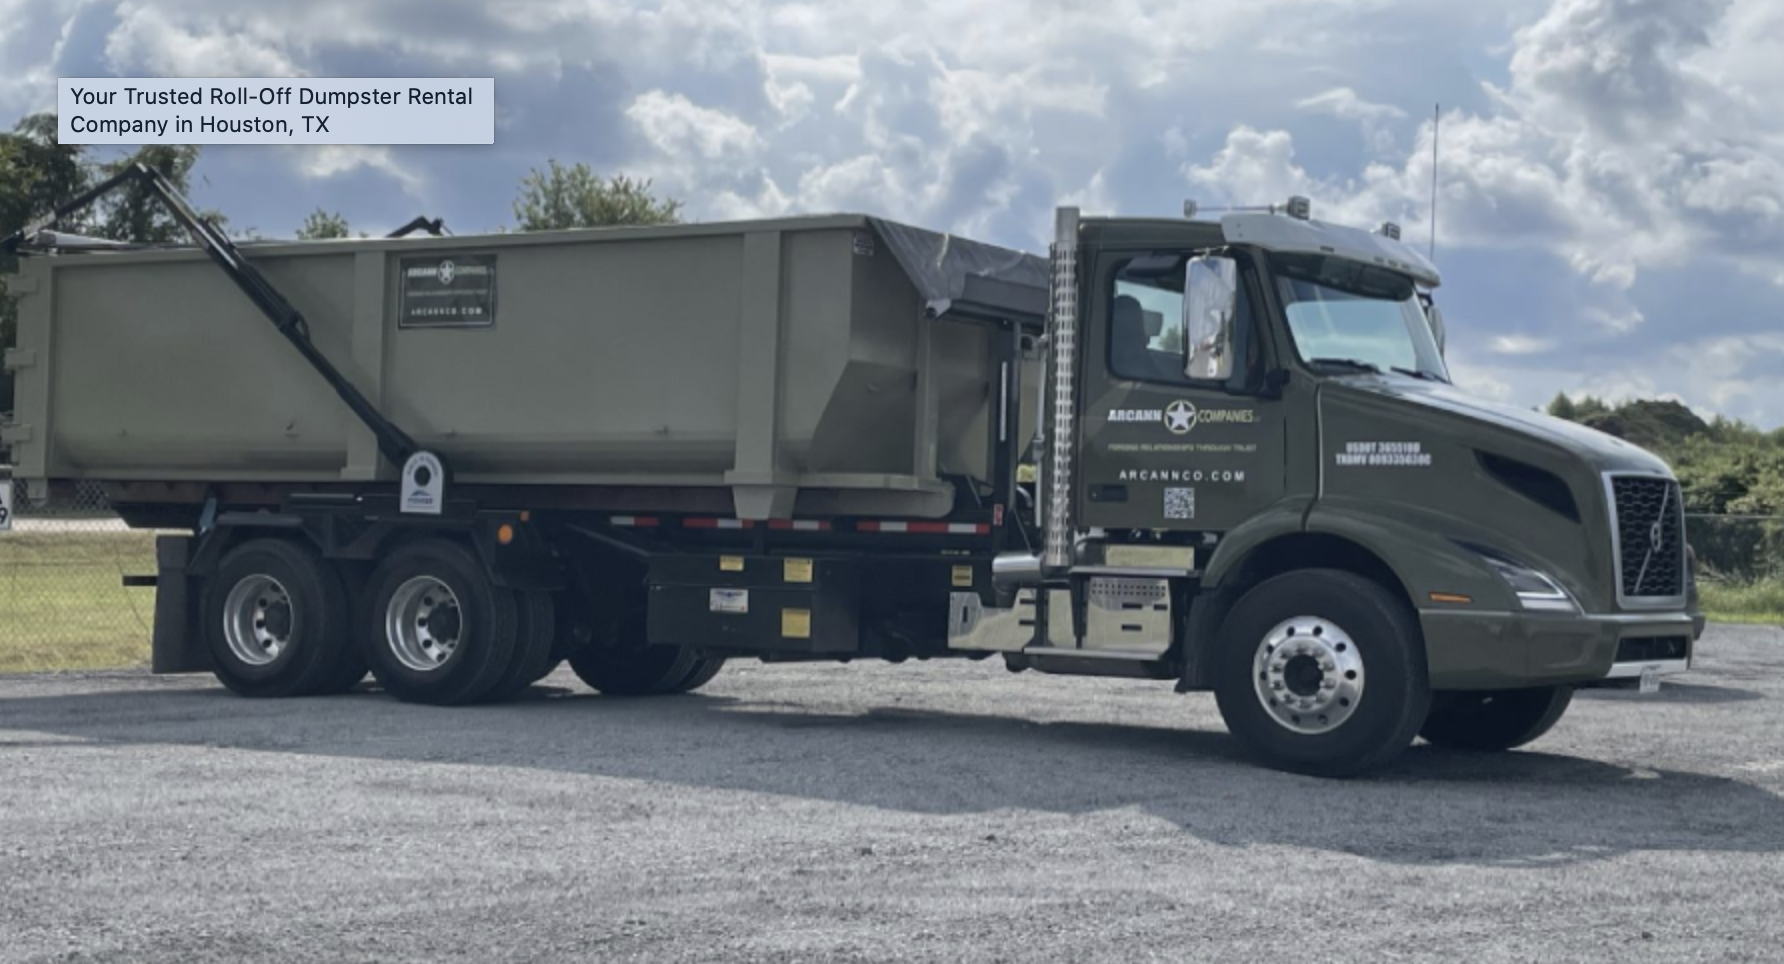 What You Need To Know About Dumpster Rental Services